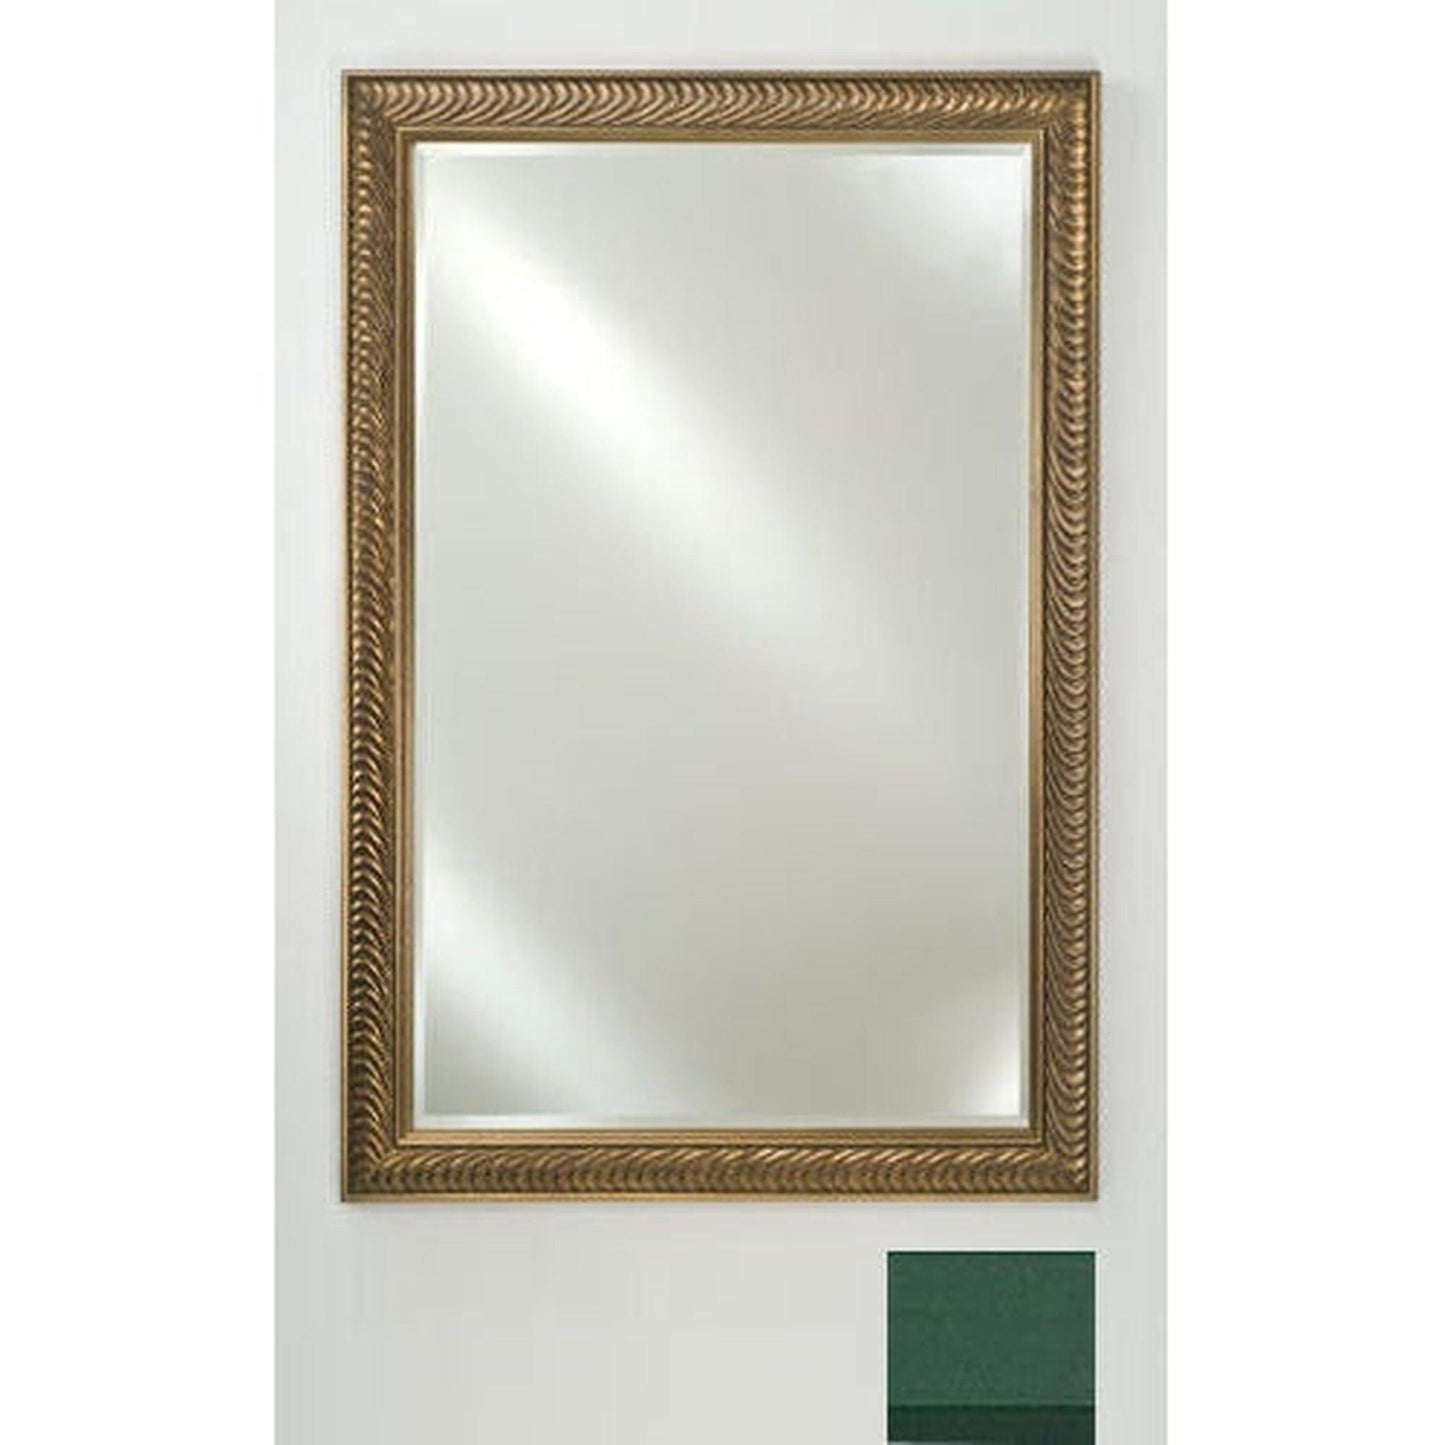 Afina Signature 20" x 26" Colorgrain Green Framed Mirror With Beveled Edge